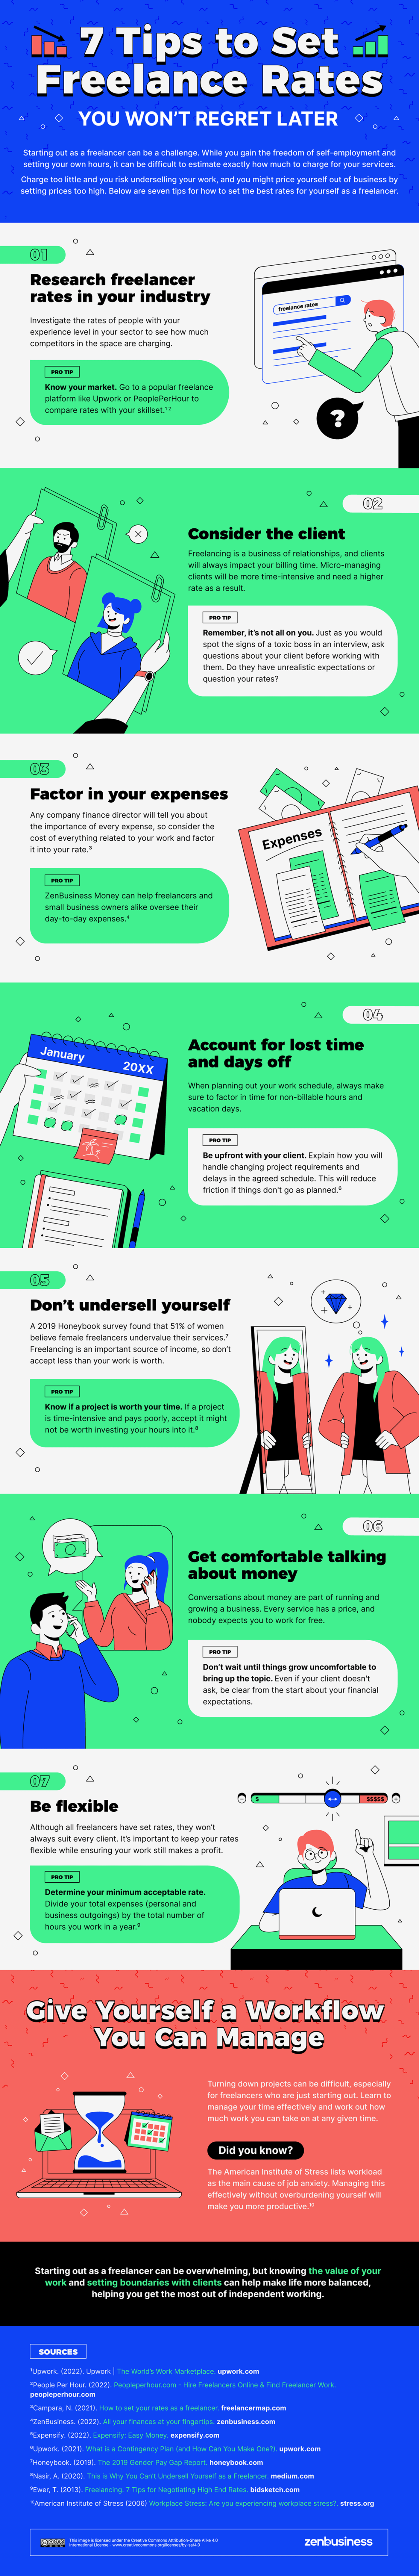 The Freelancer Pay Gap is Real: Here’s How You Can Earn the Rates You Deserve - infographic